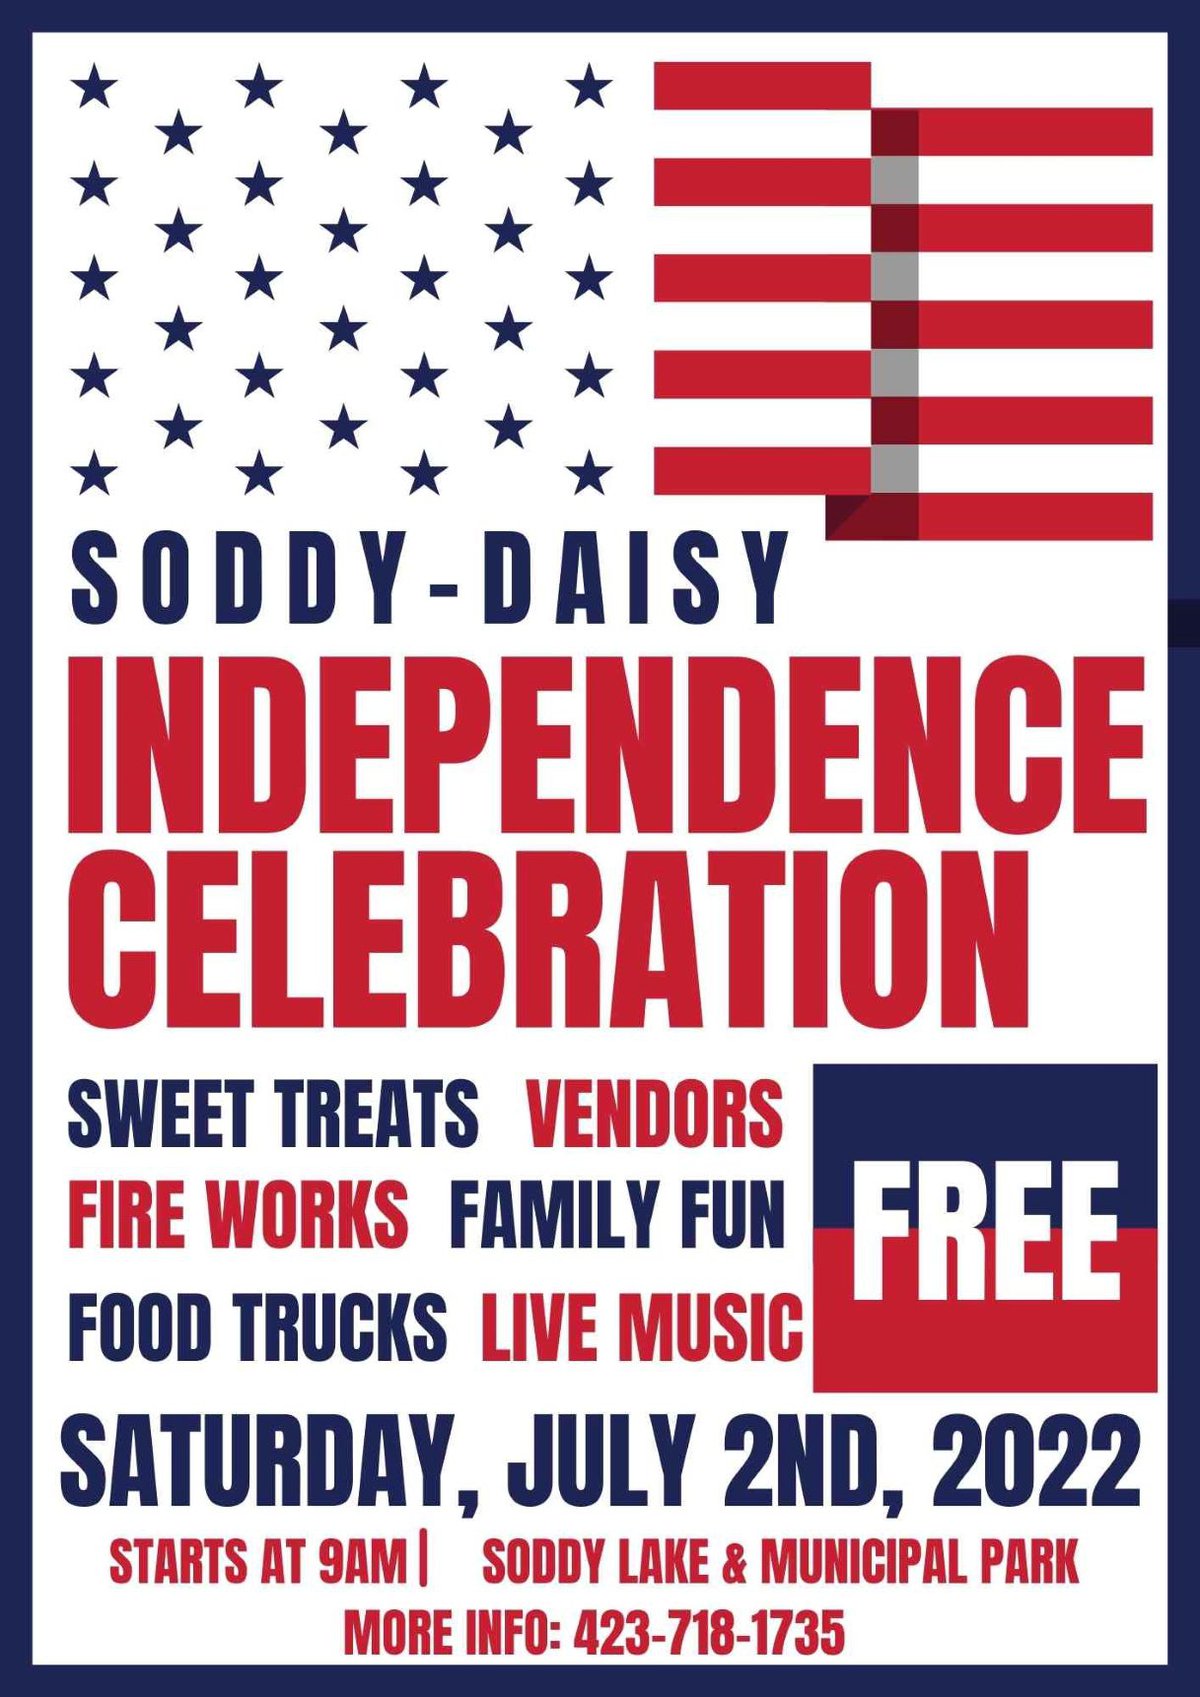 SoddyDaisy Independence Celebration and the 25th Annual Firecracker